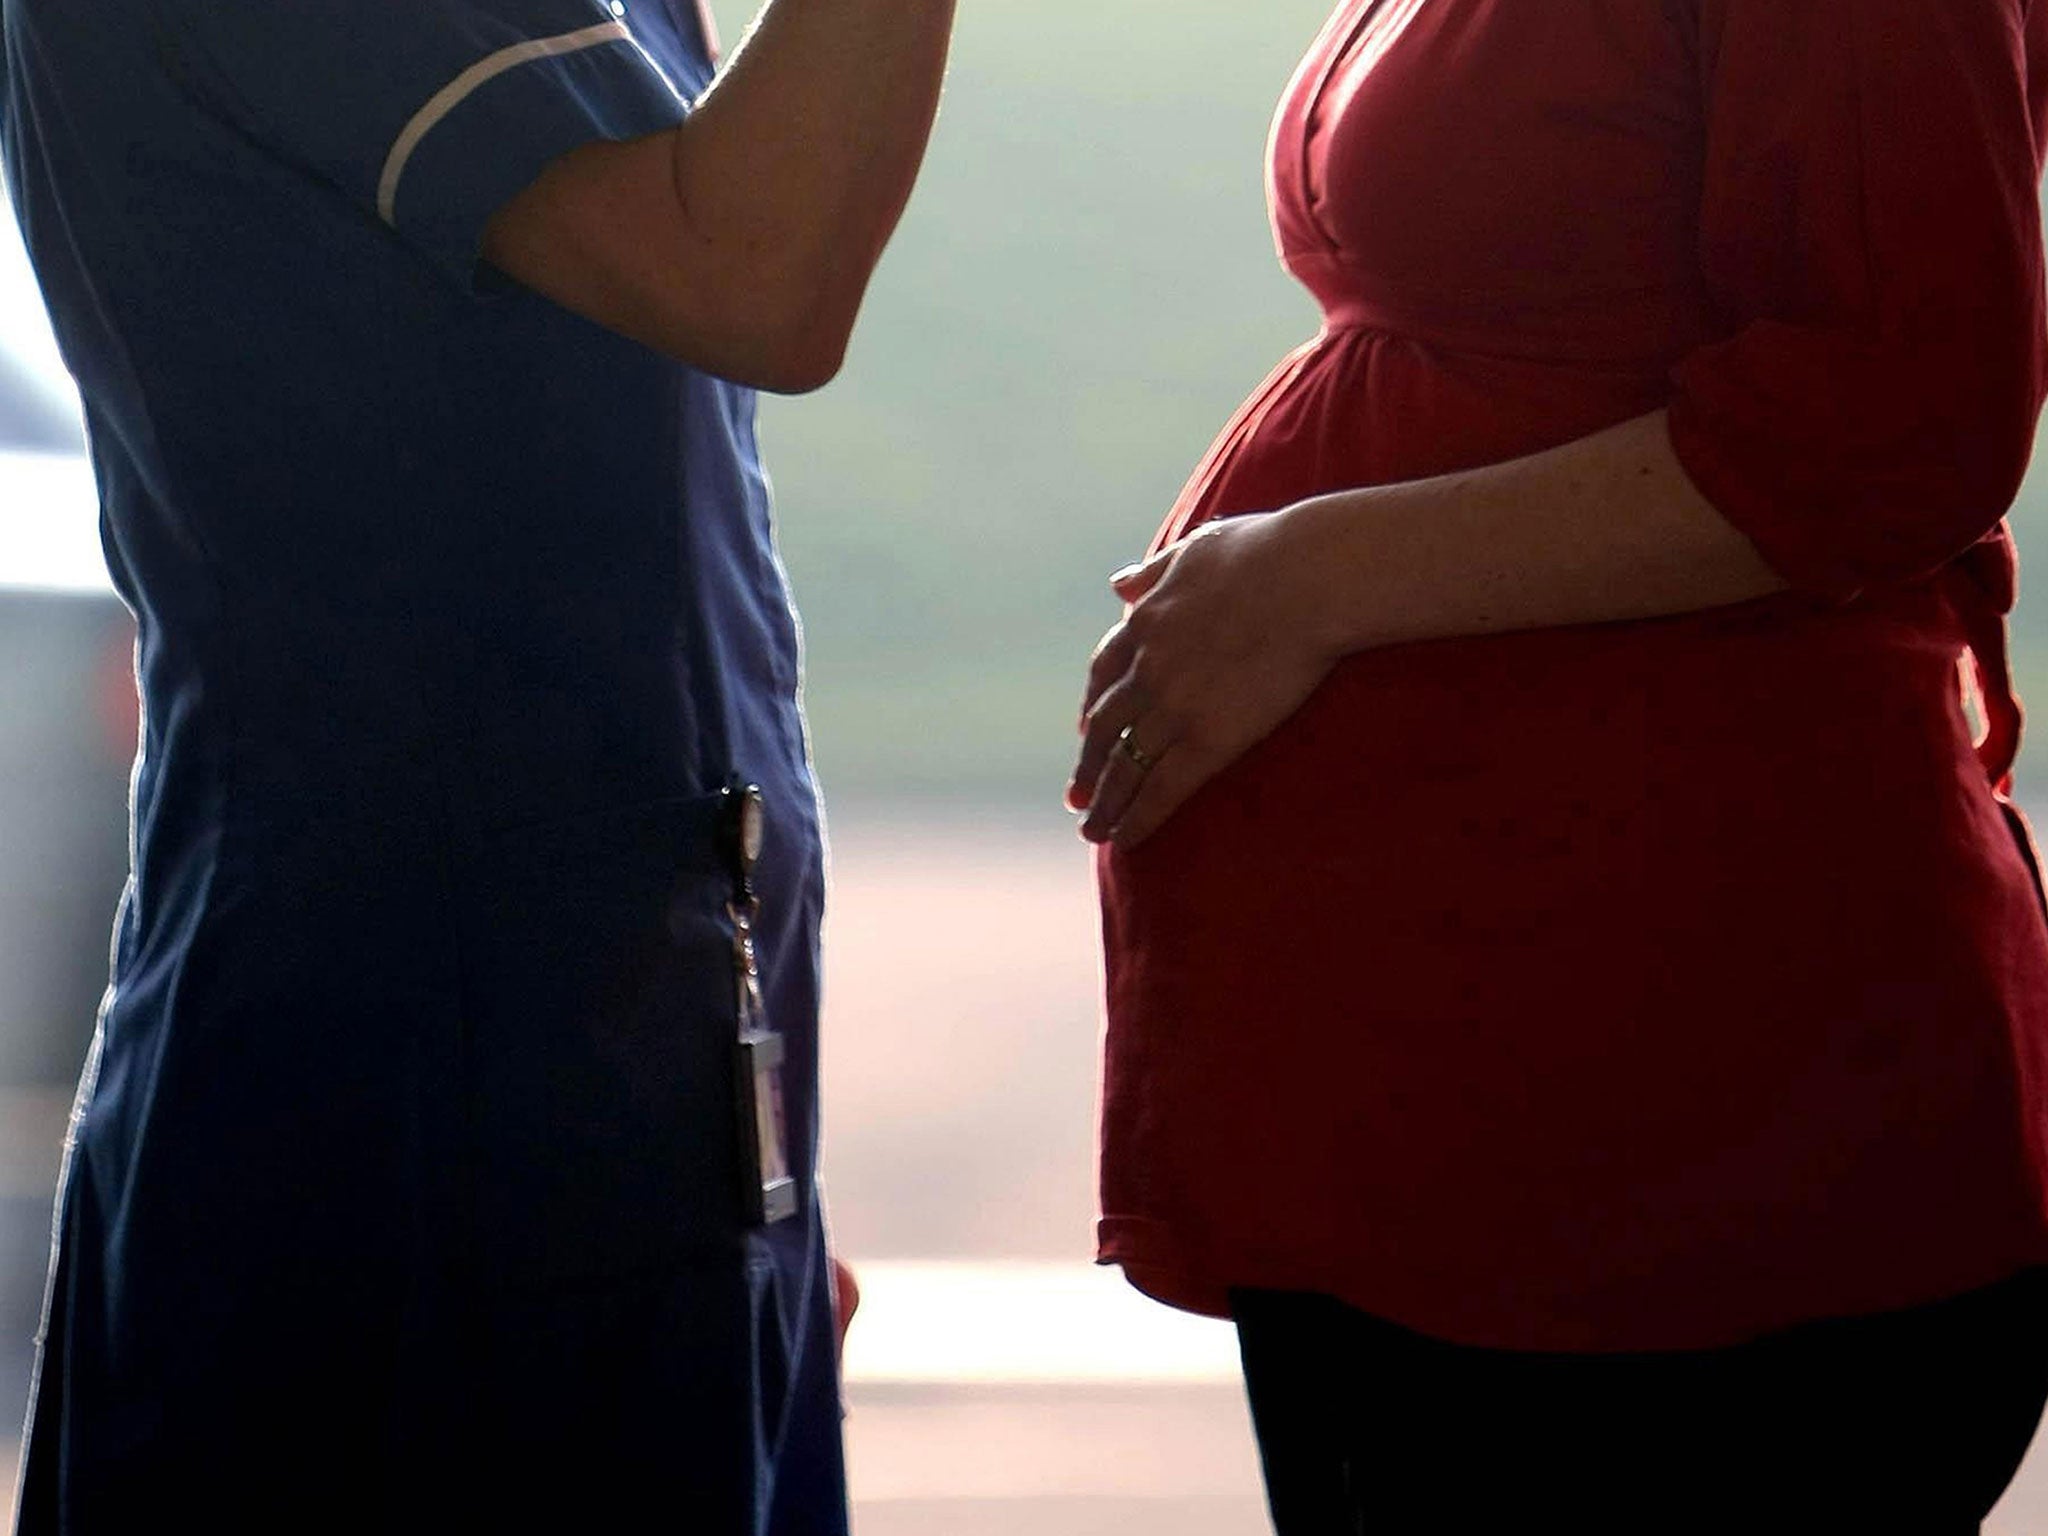 Midwives 'should see abortion as part of their job' according to the RCM chief